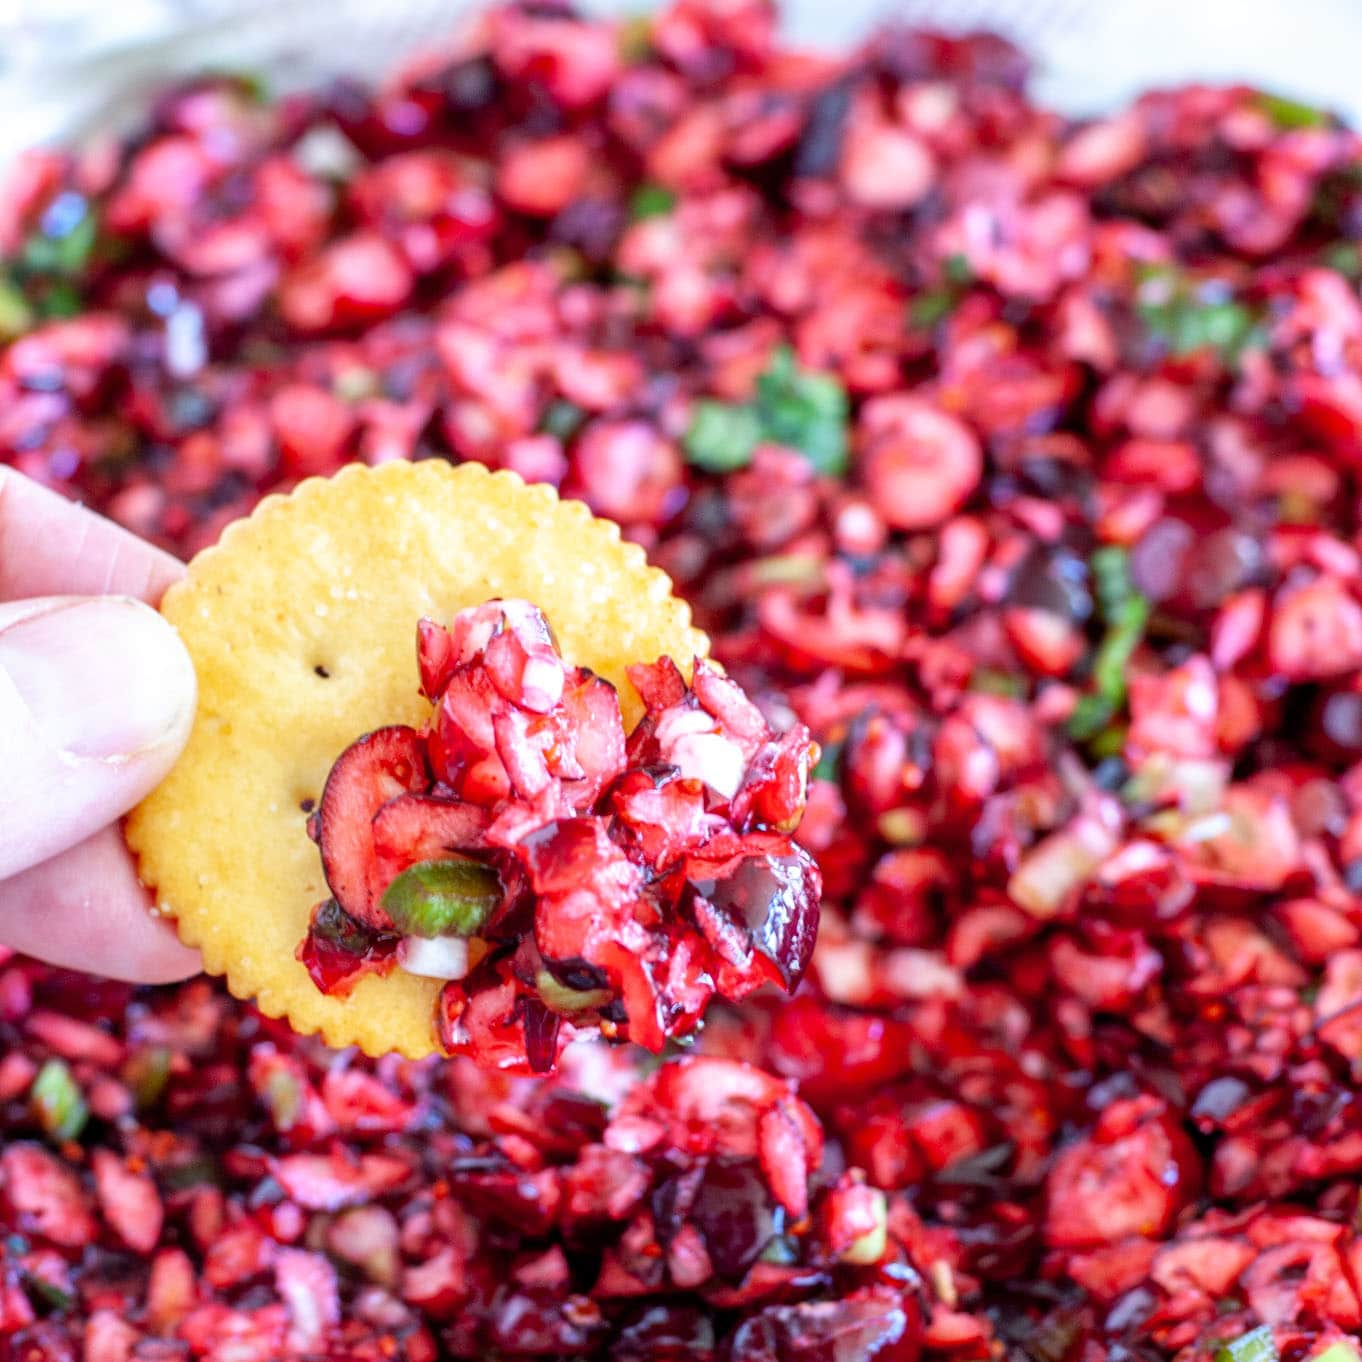 Cracker with cranberry dip